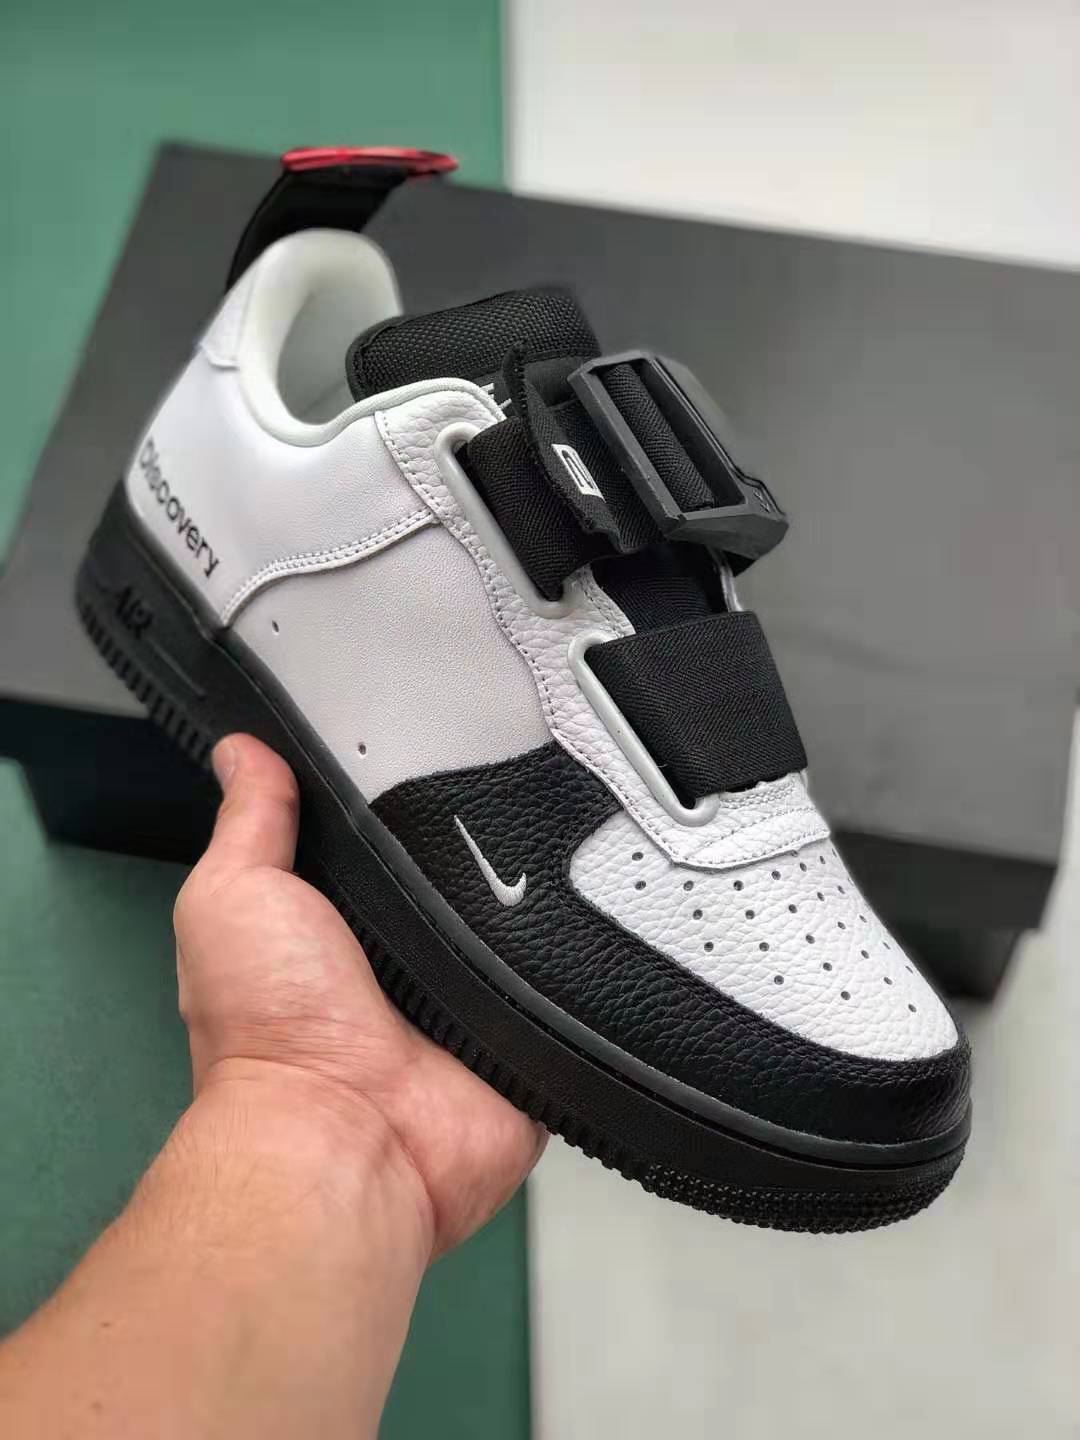 Nike Air Force 1 Utility QS NASA AV6247-300: Futuristic Design and Exceptional Comfort